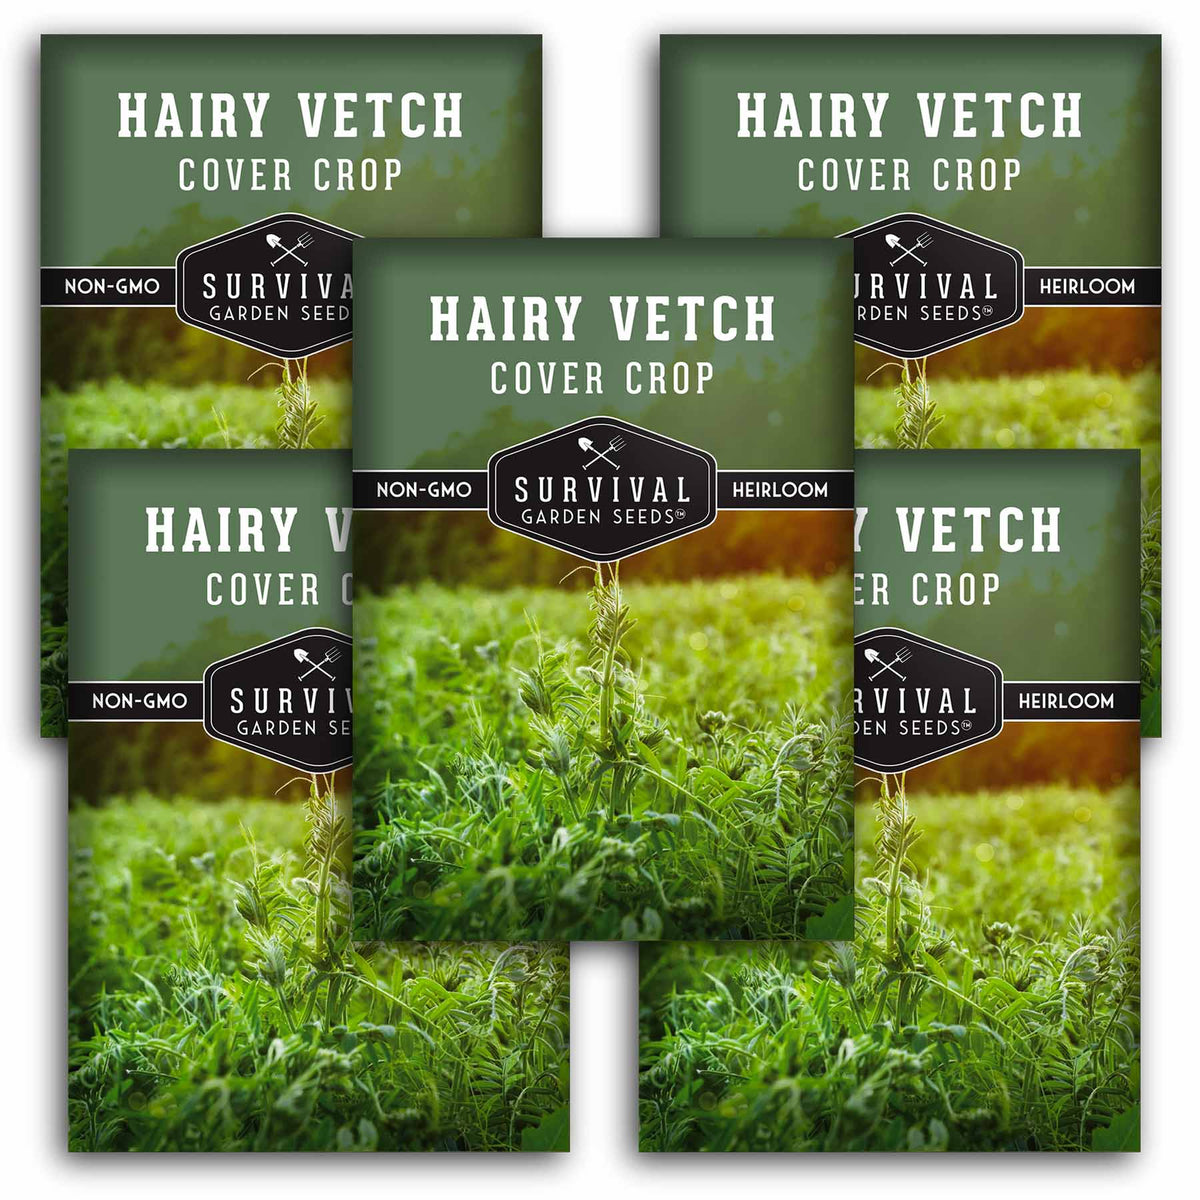 5 packet of Hairy Vetch seeds